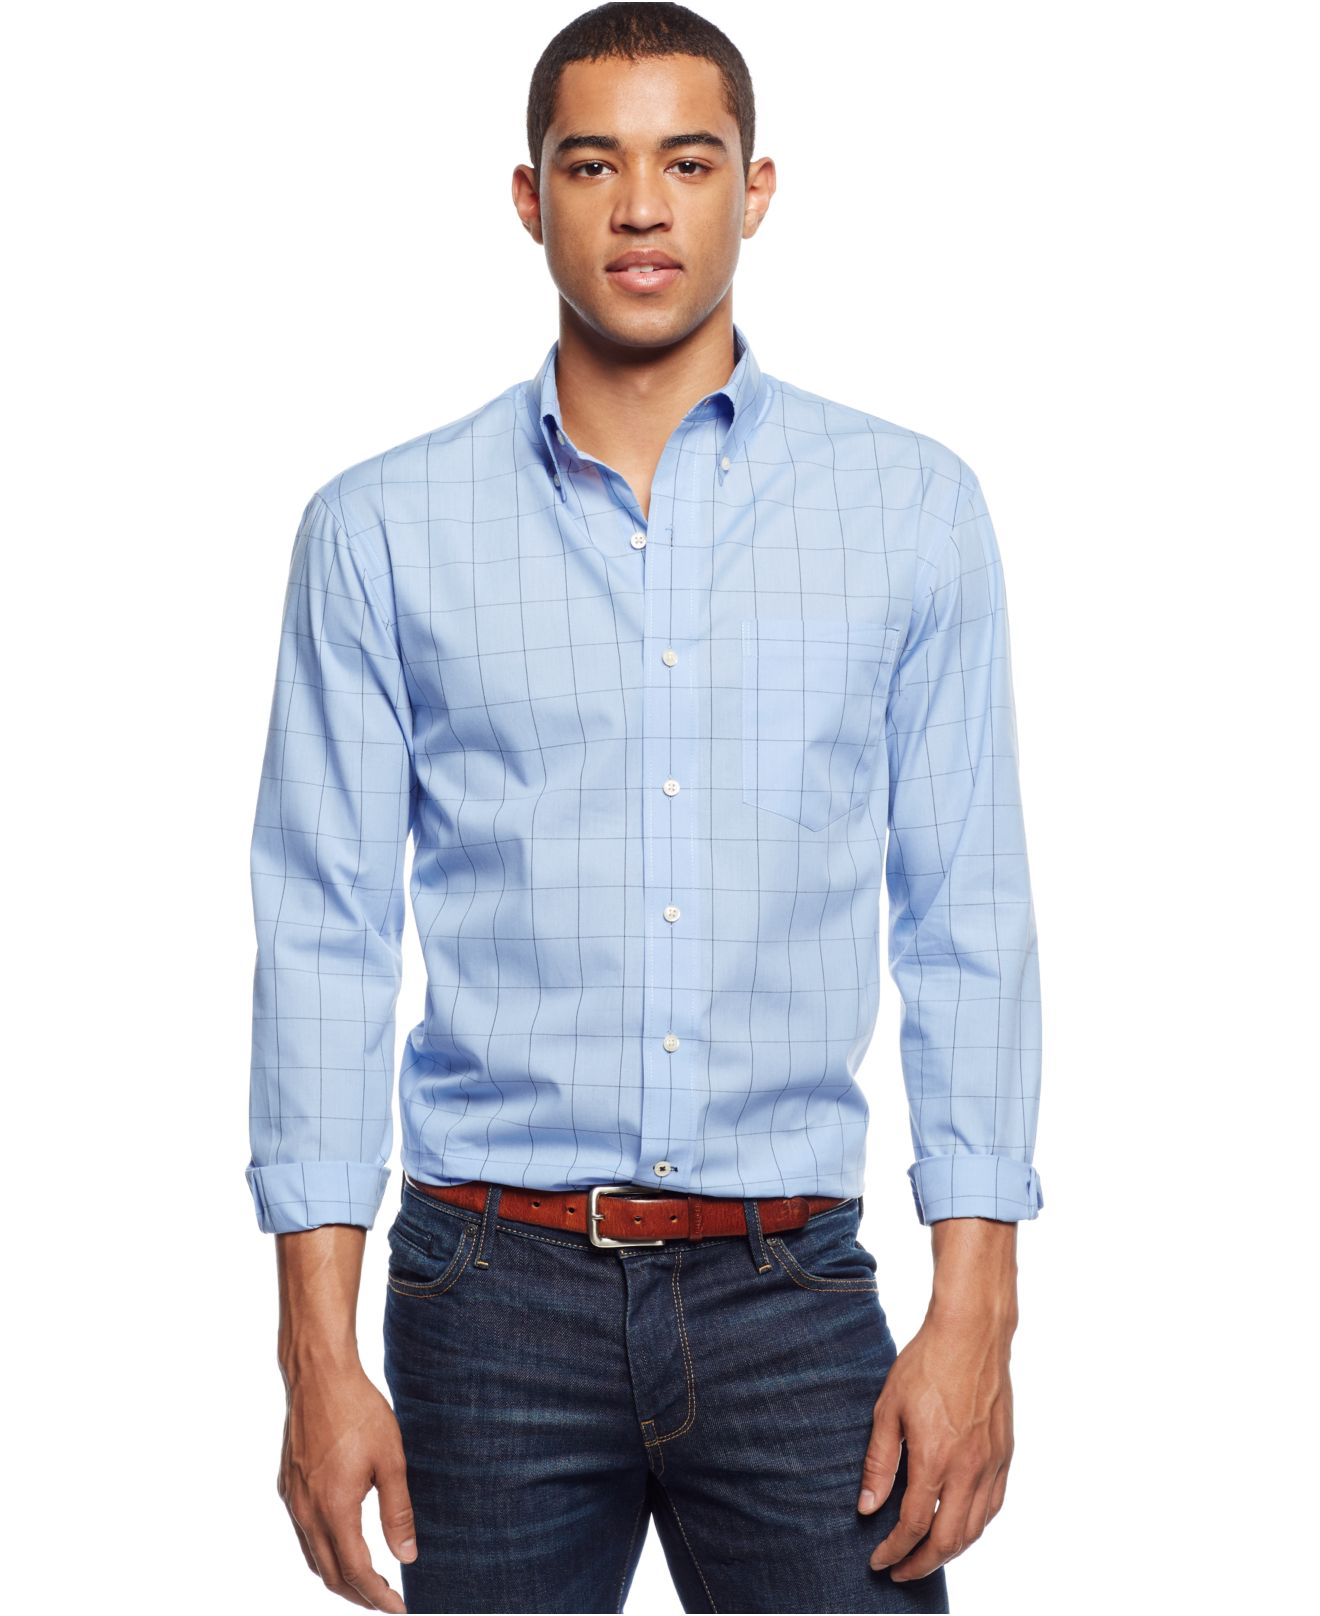 Lyst - Izod Big And Tall Long-sleeve Windowpane Shirt in Blue for Men